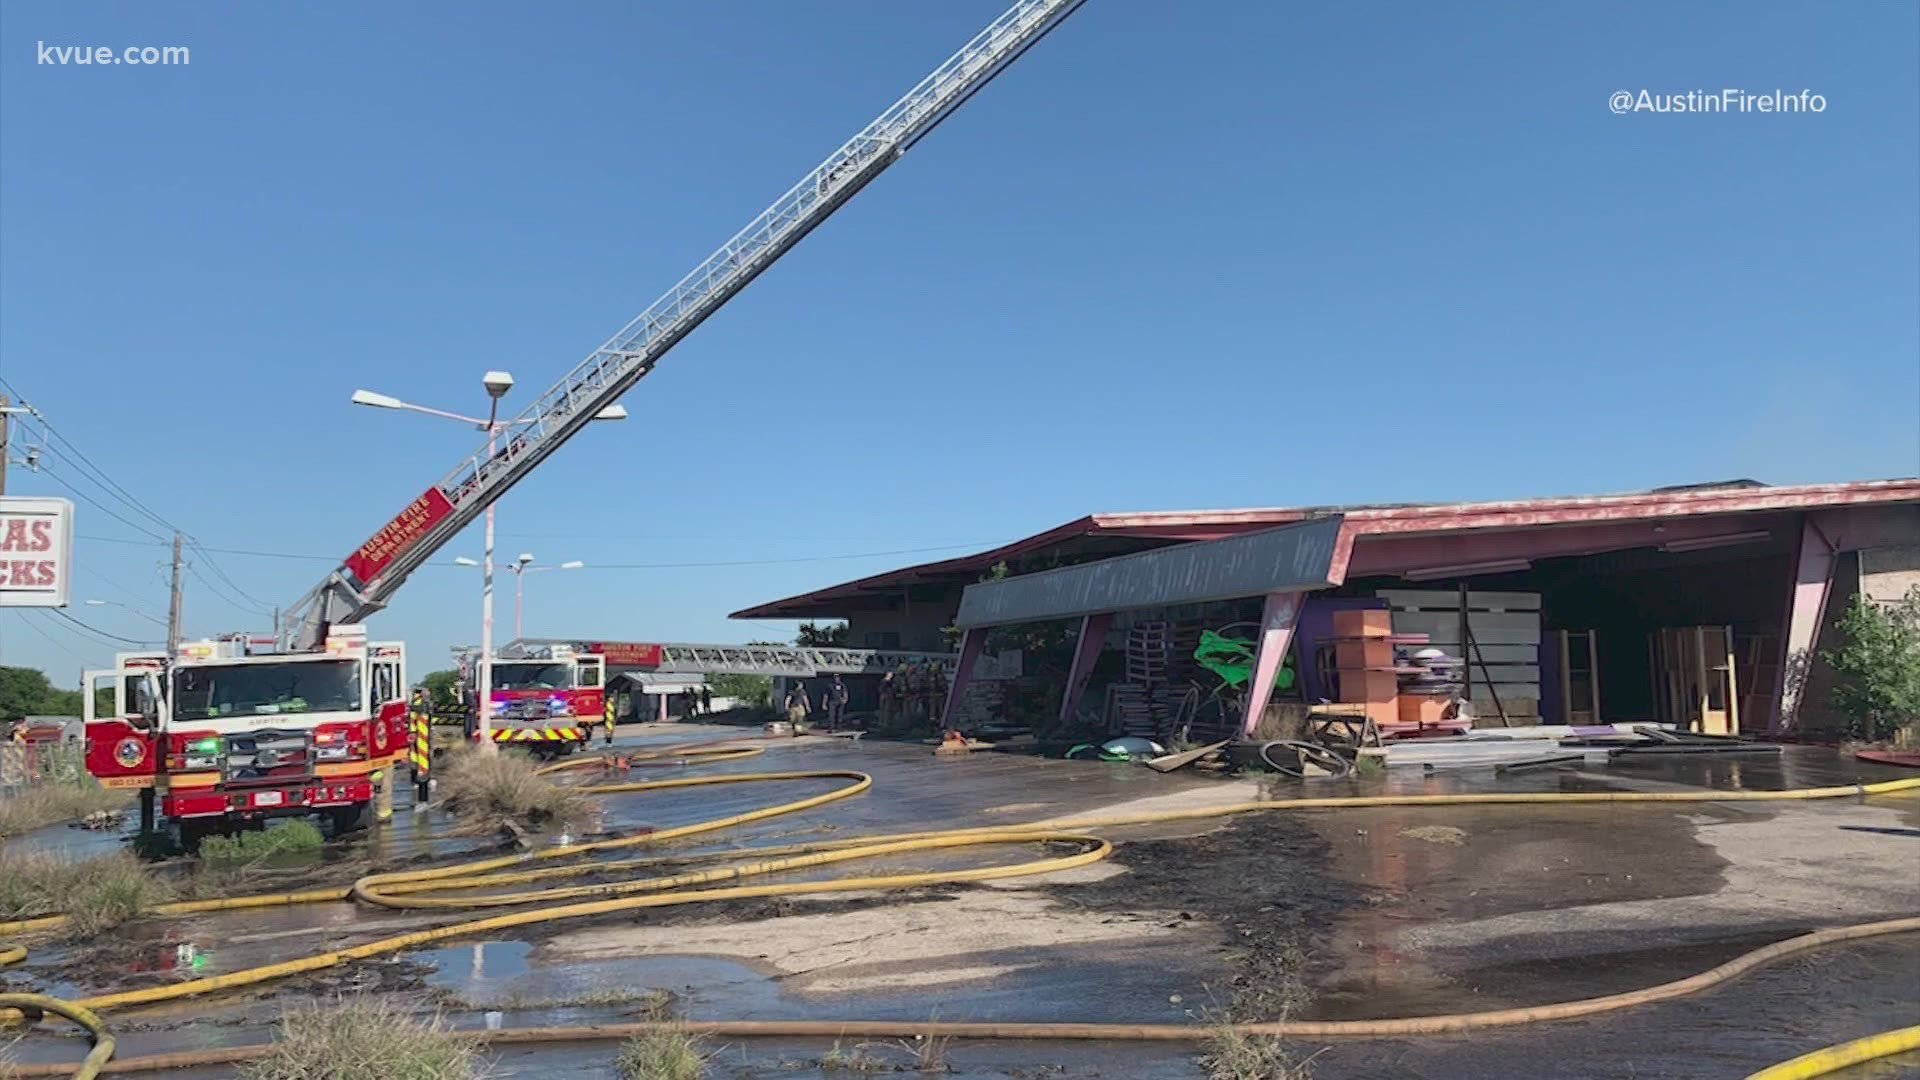 More than 100 Austin firefighters are being evaluated after they were possibly exposed to asbestos.